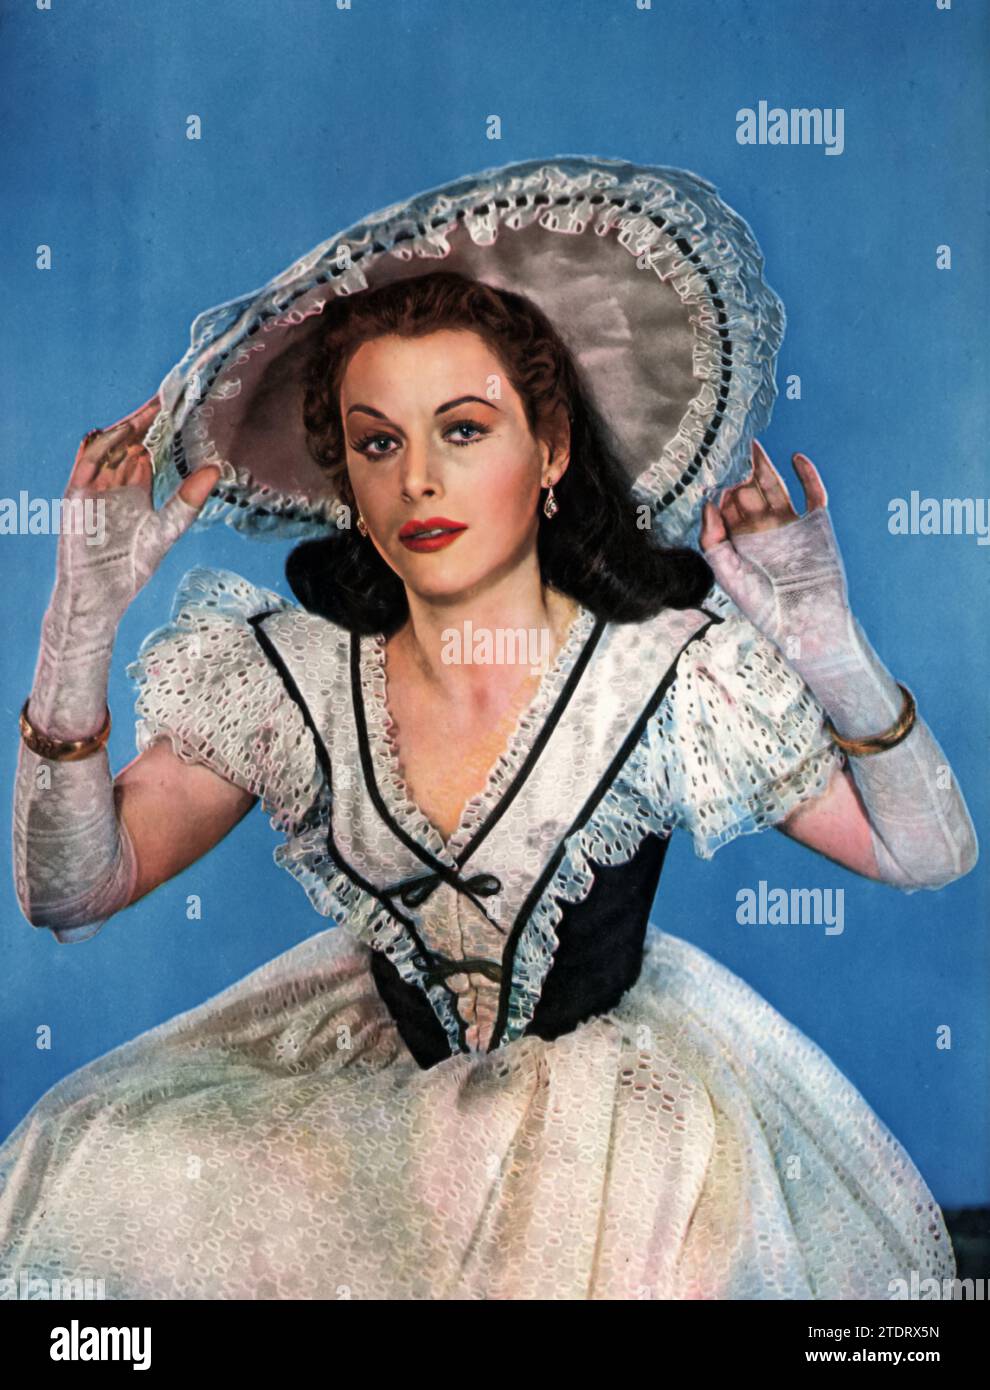 Hedy Lamarr (born November 9, 1914 - died January 19, 2000), a celebrated actress known for her striking beauty and talent, shone brightly in films such as 'Dishonored Lady' (1947). In this film, Lamarr portrays Madeleine Damien, an art editor battling inner turmoil and societal pressures. Her nuanced performance in this dramatic role showcases her ability to convey deep and complex emotions, making her an unforgettable icon of the silver screen. Stock Photo